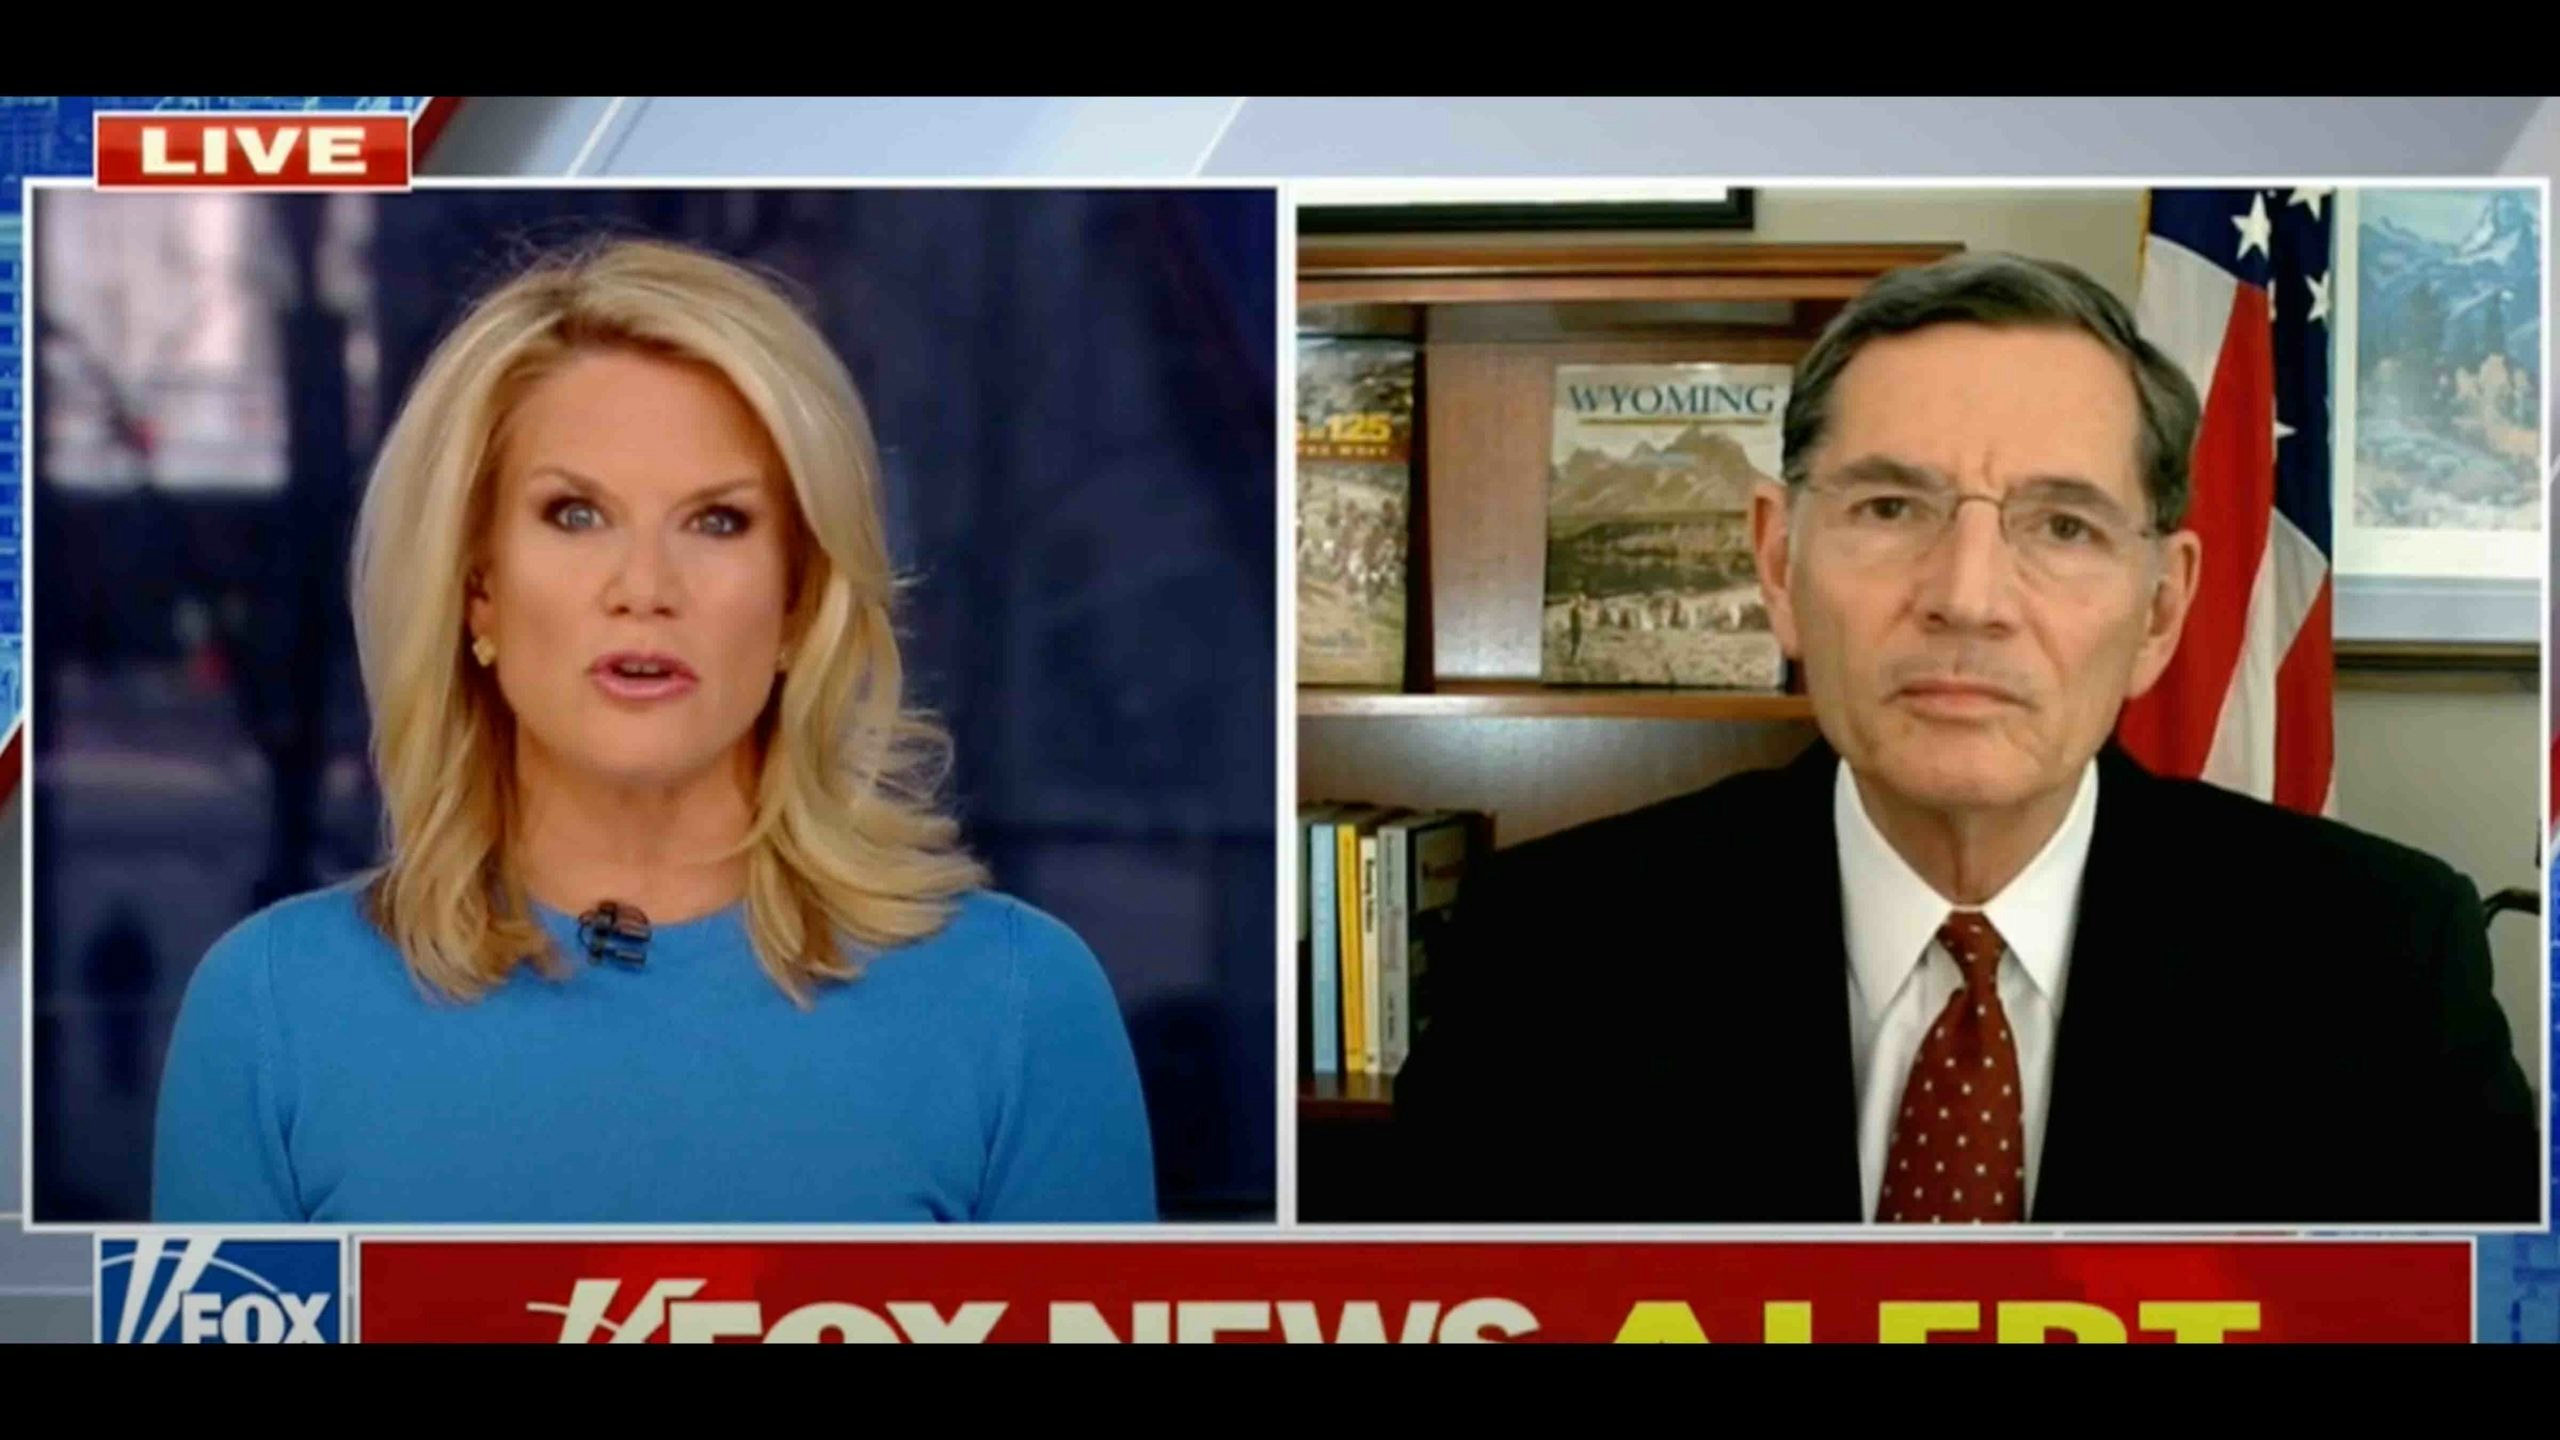 Barrasso illegal iimmigration scaled